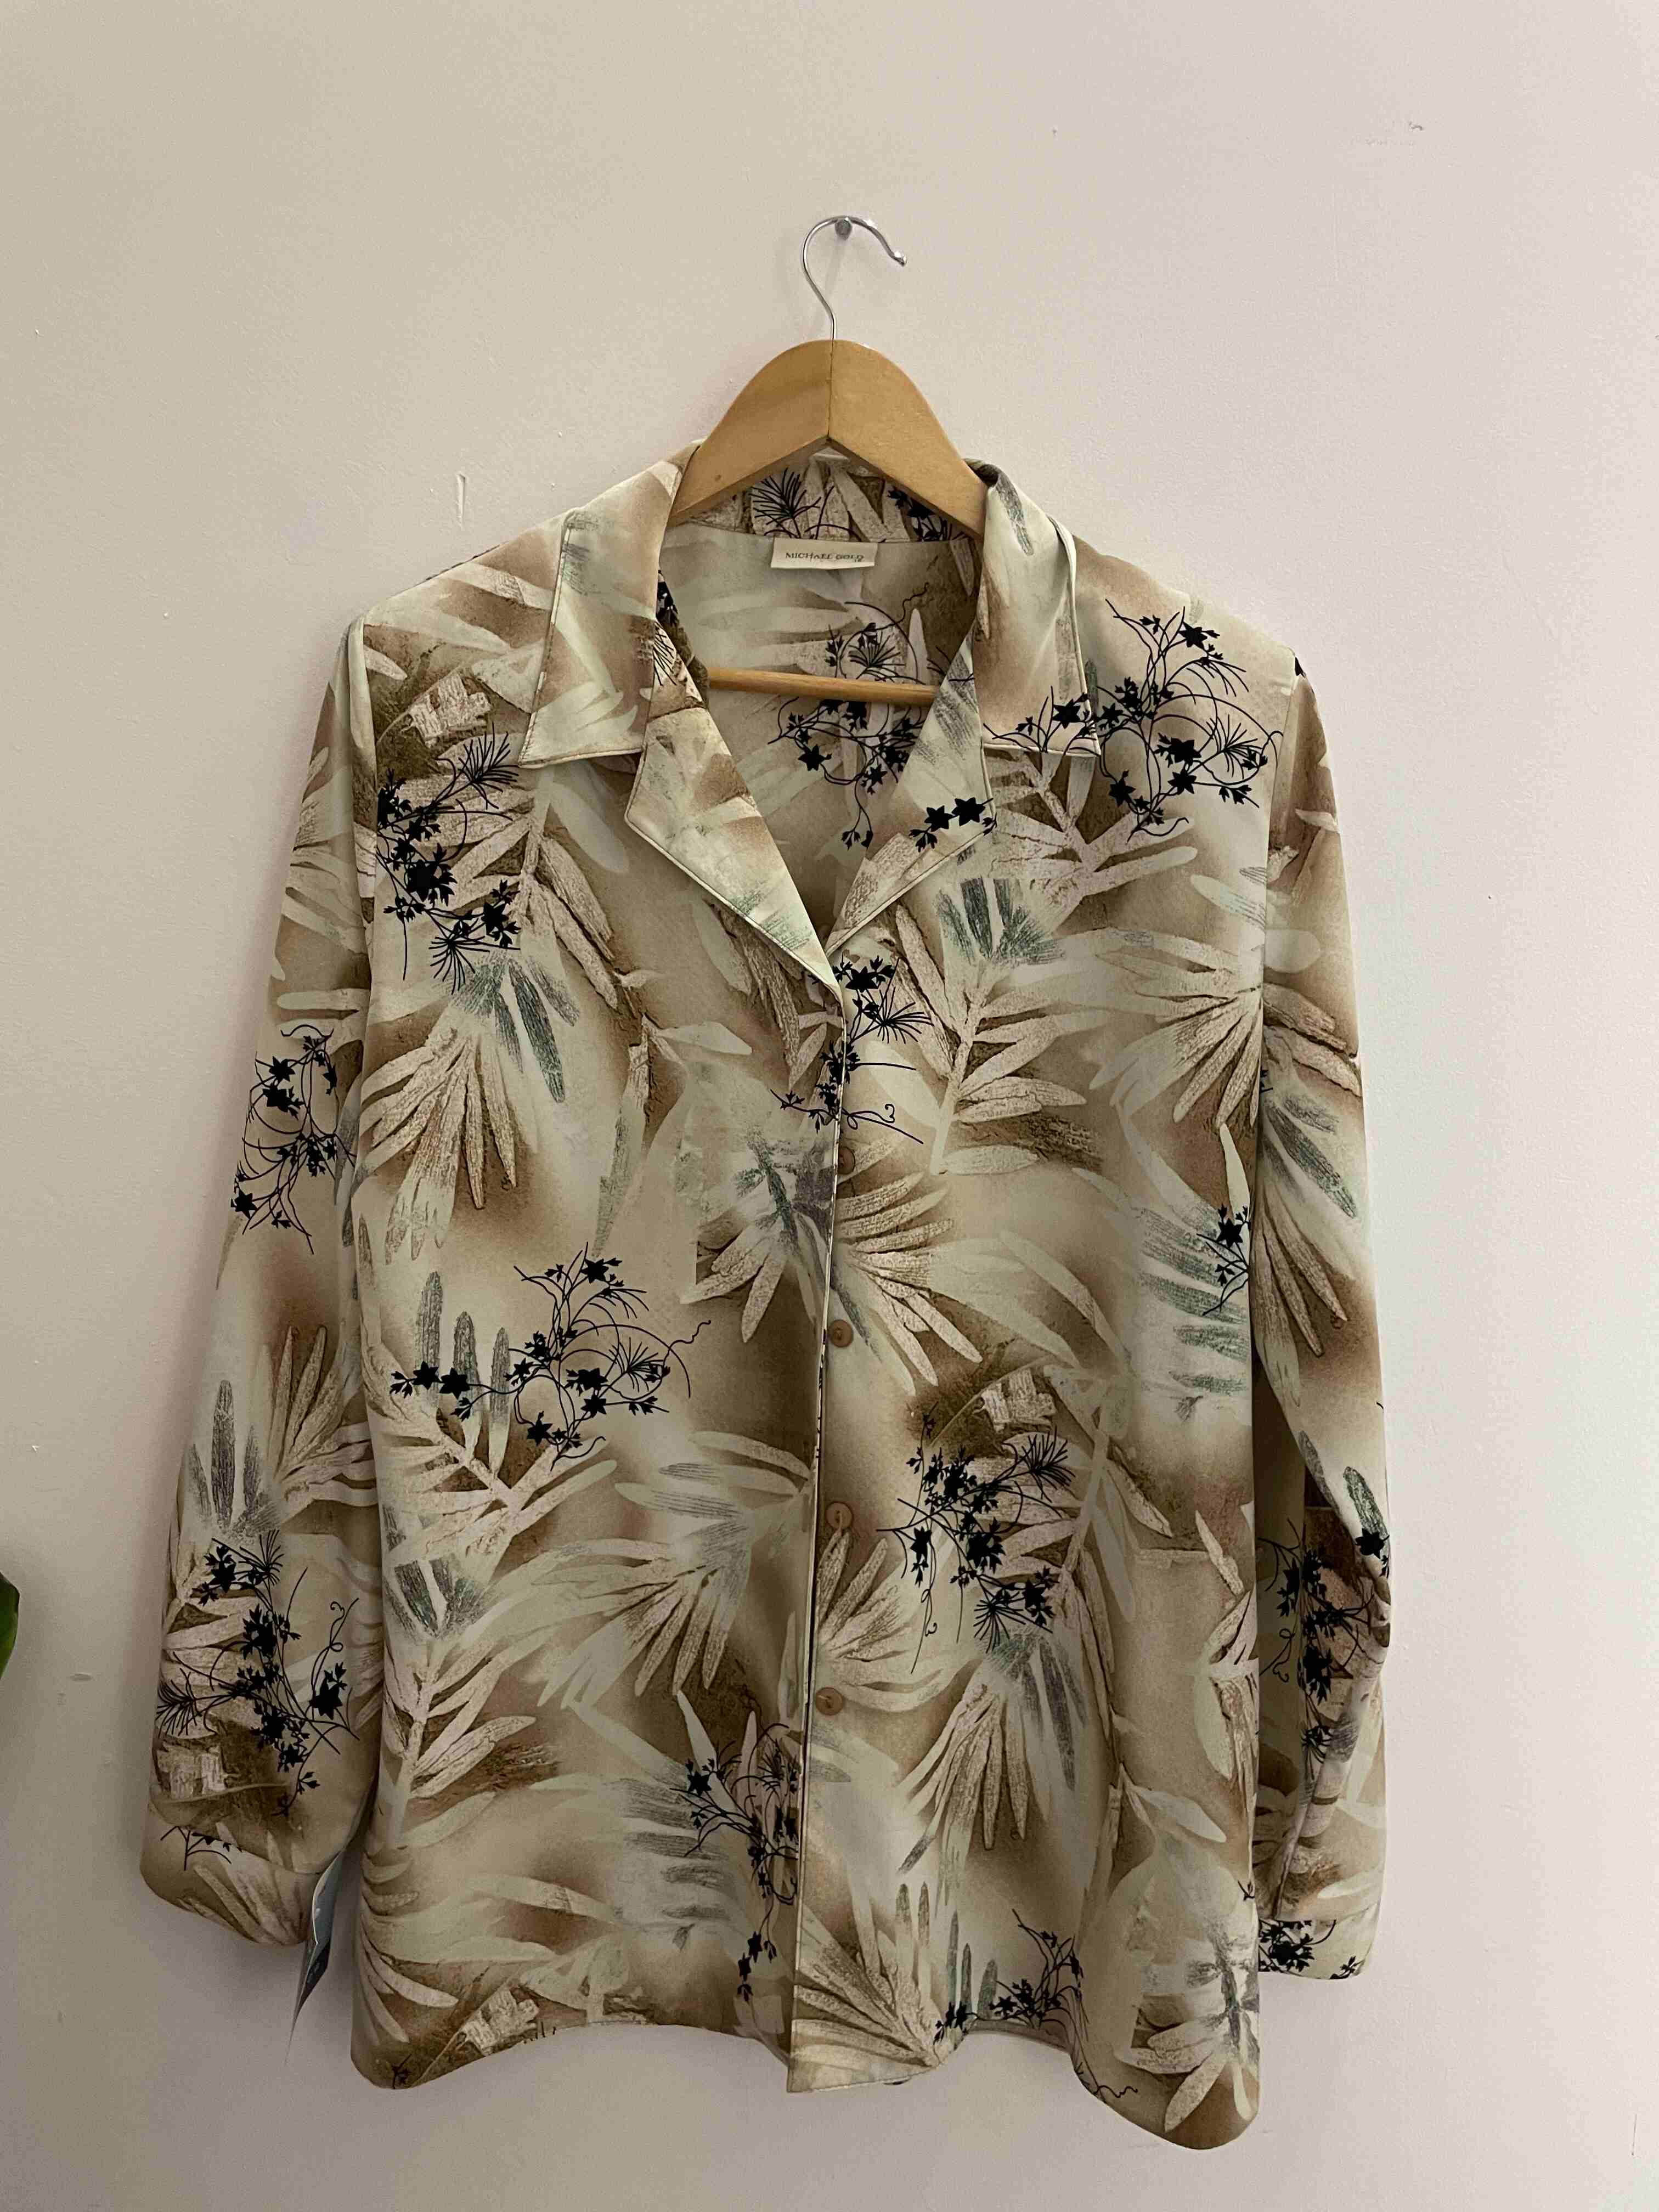 Vintage cream floral pattern small long sleeve shirt